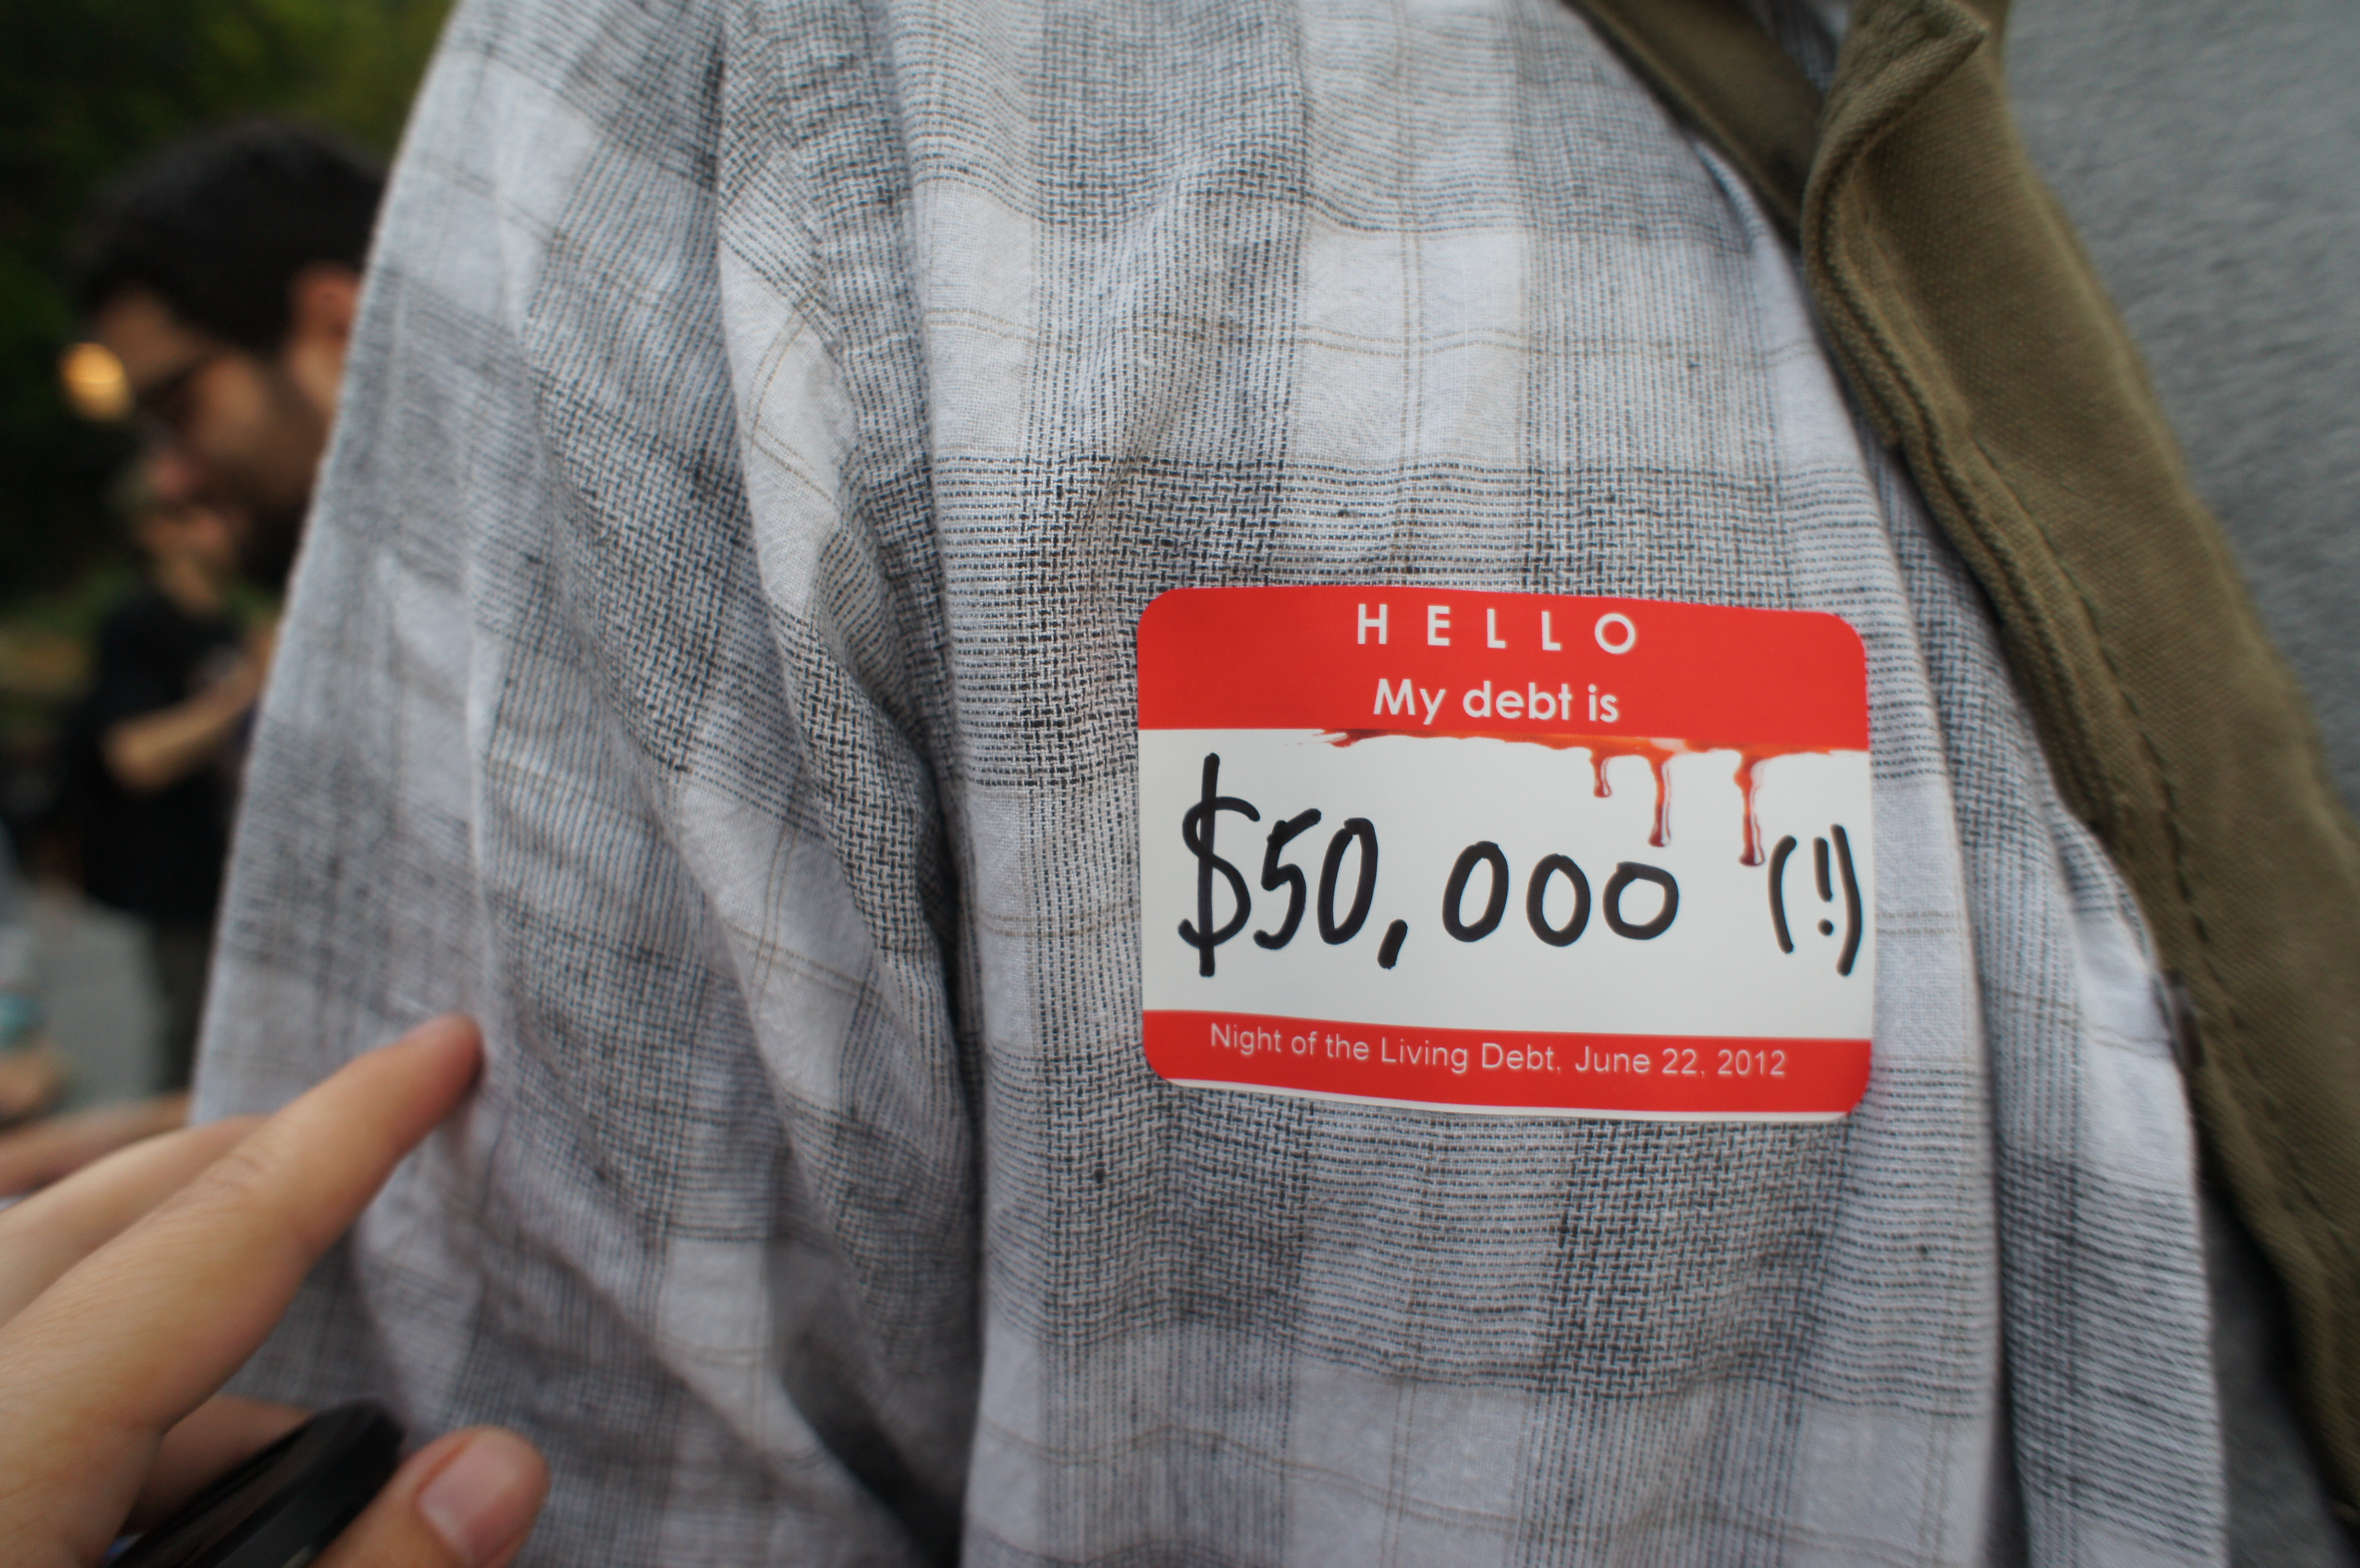 A close-up of a red-and-white name tag on someone’s shirt says, “Hello my debt is $50,000 (!)”